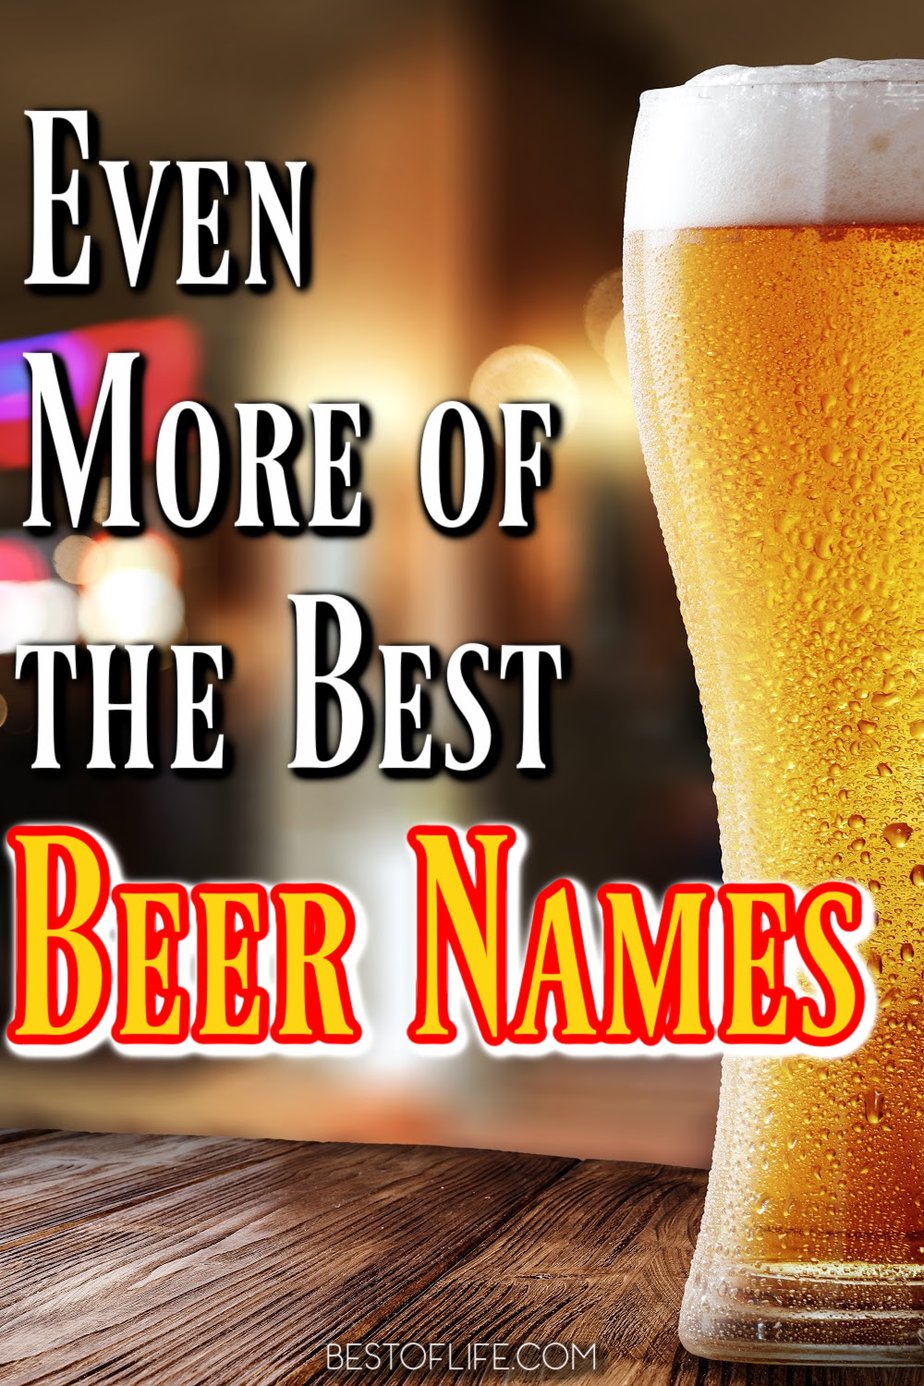 They say it's all in the name, check out more of the best beer names we could round up and decide for yourself if that's true! Best Beer Names | Best Beers | Best Craft Beers | Beers with the Best Names #beer #craftbeer #happyhour